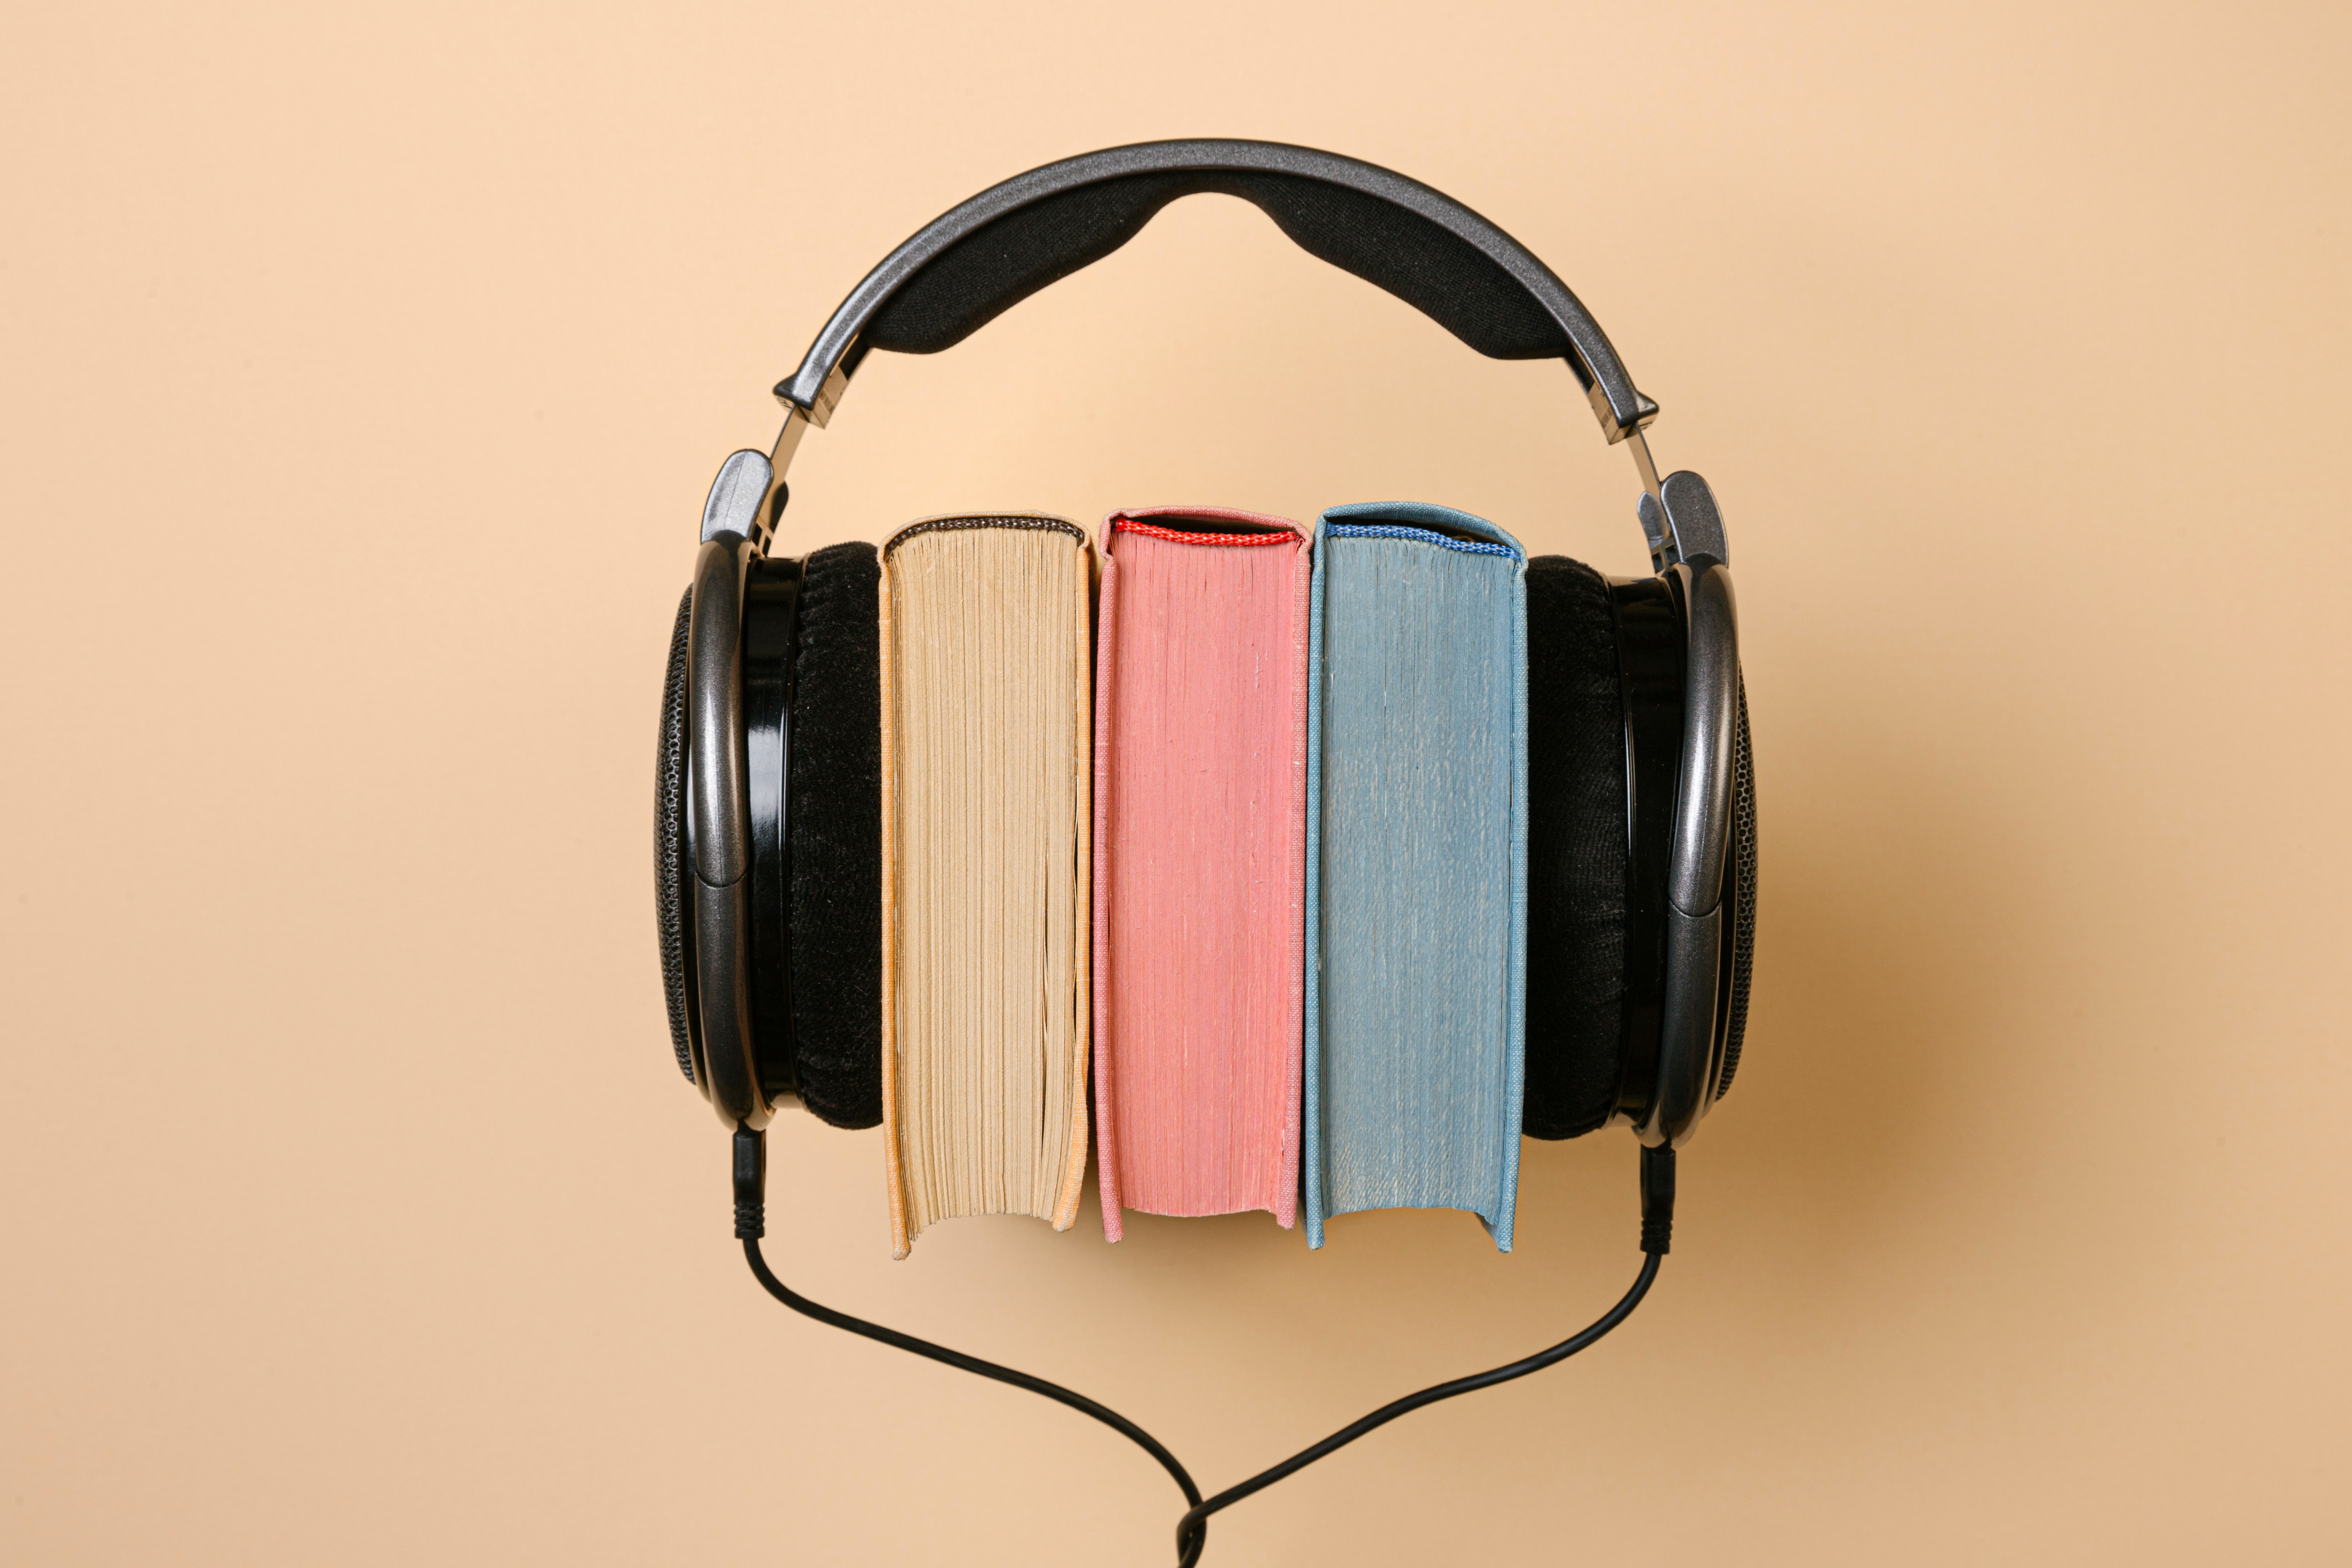 Audiobooks read by AI, not humans